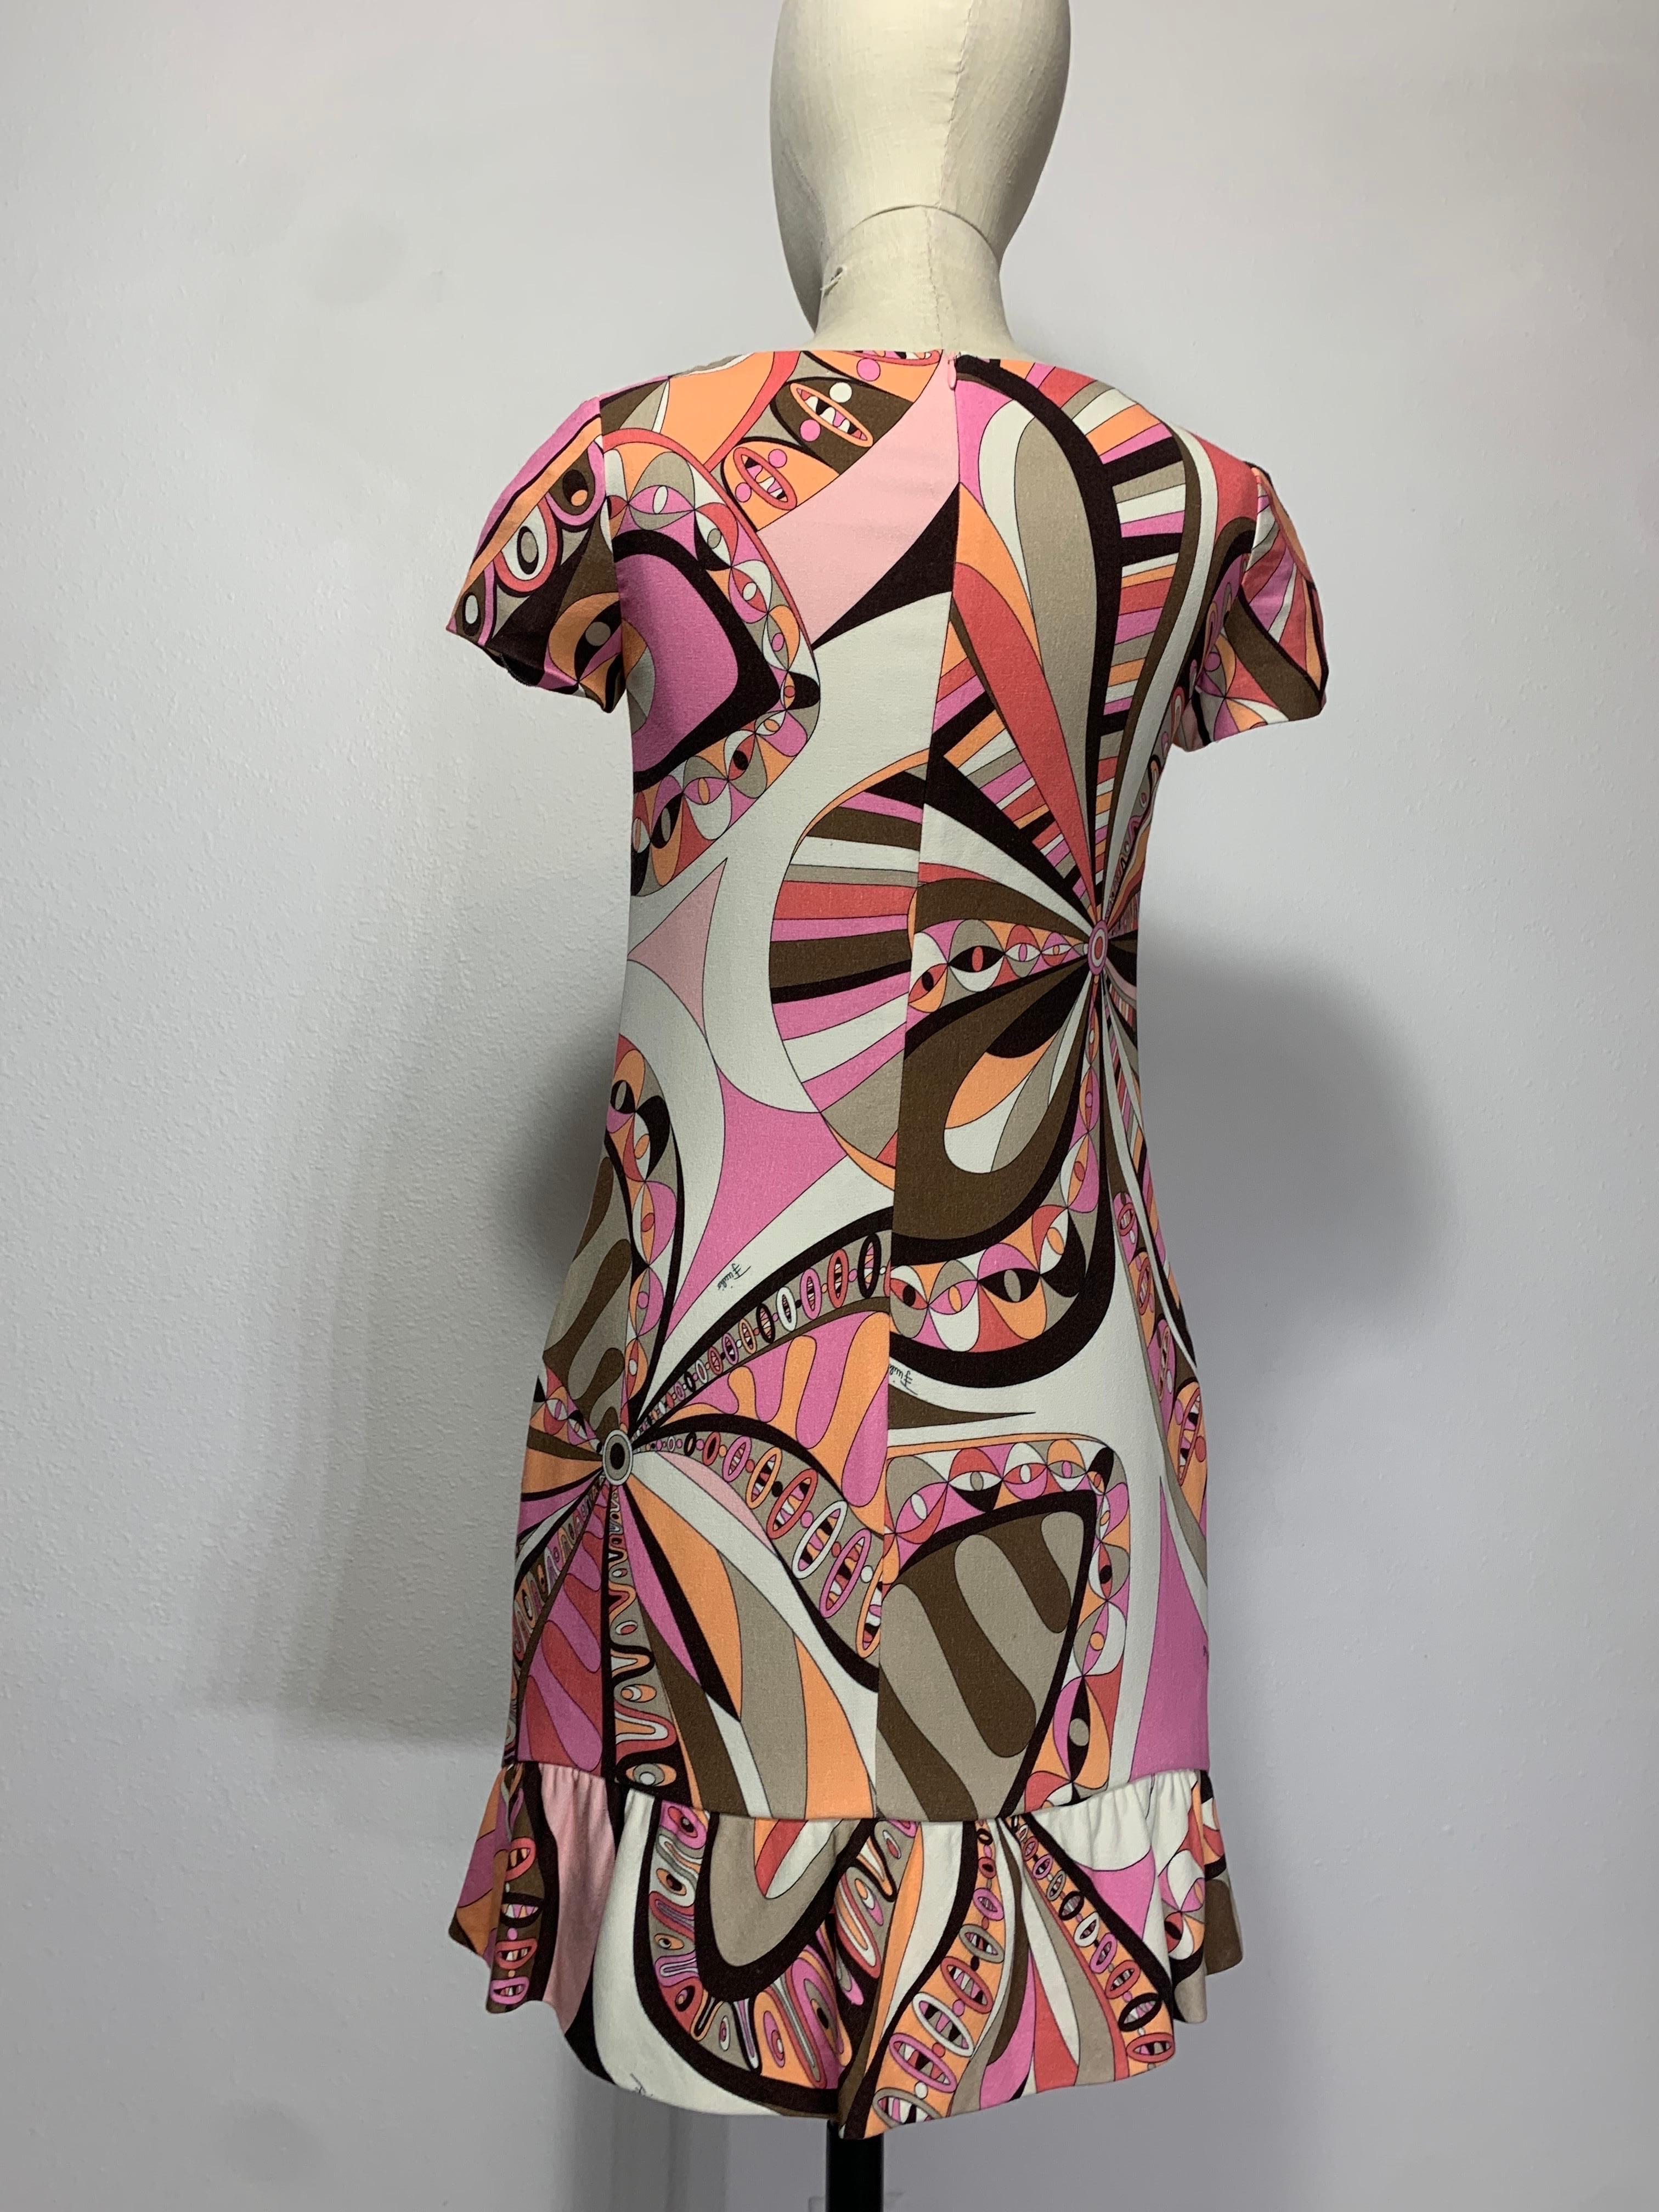 Contemporary Emilio Pucci Mod-Style Short-Sleeved Day Dress in Taupe Pink Print For Sale 5